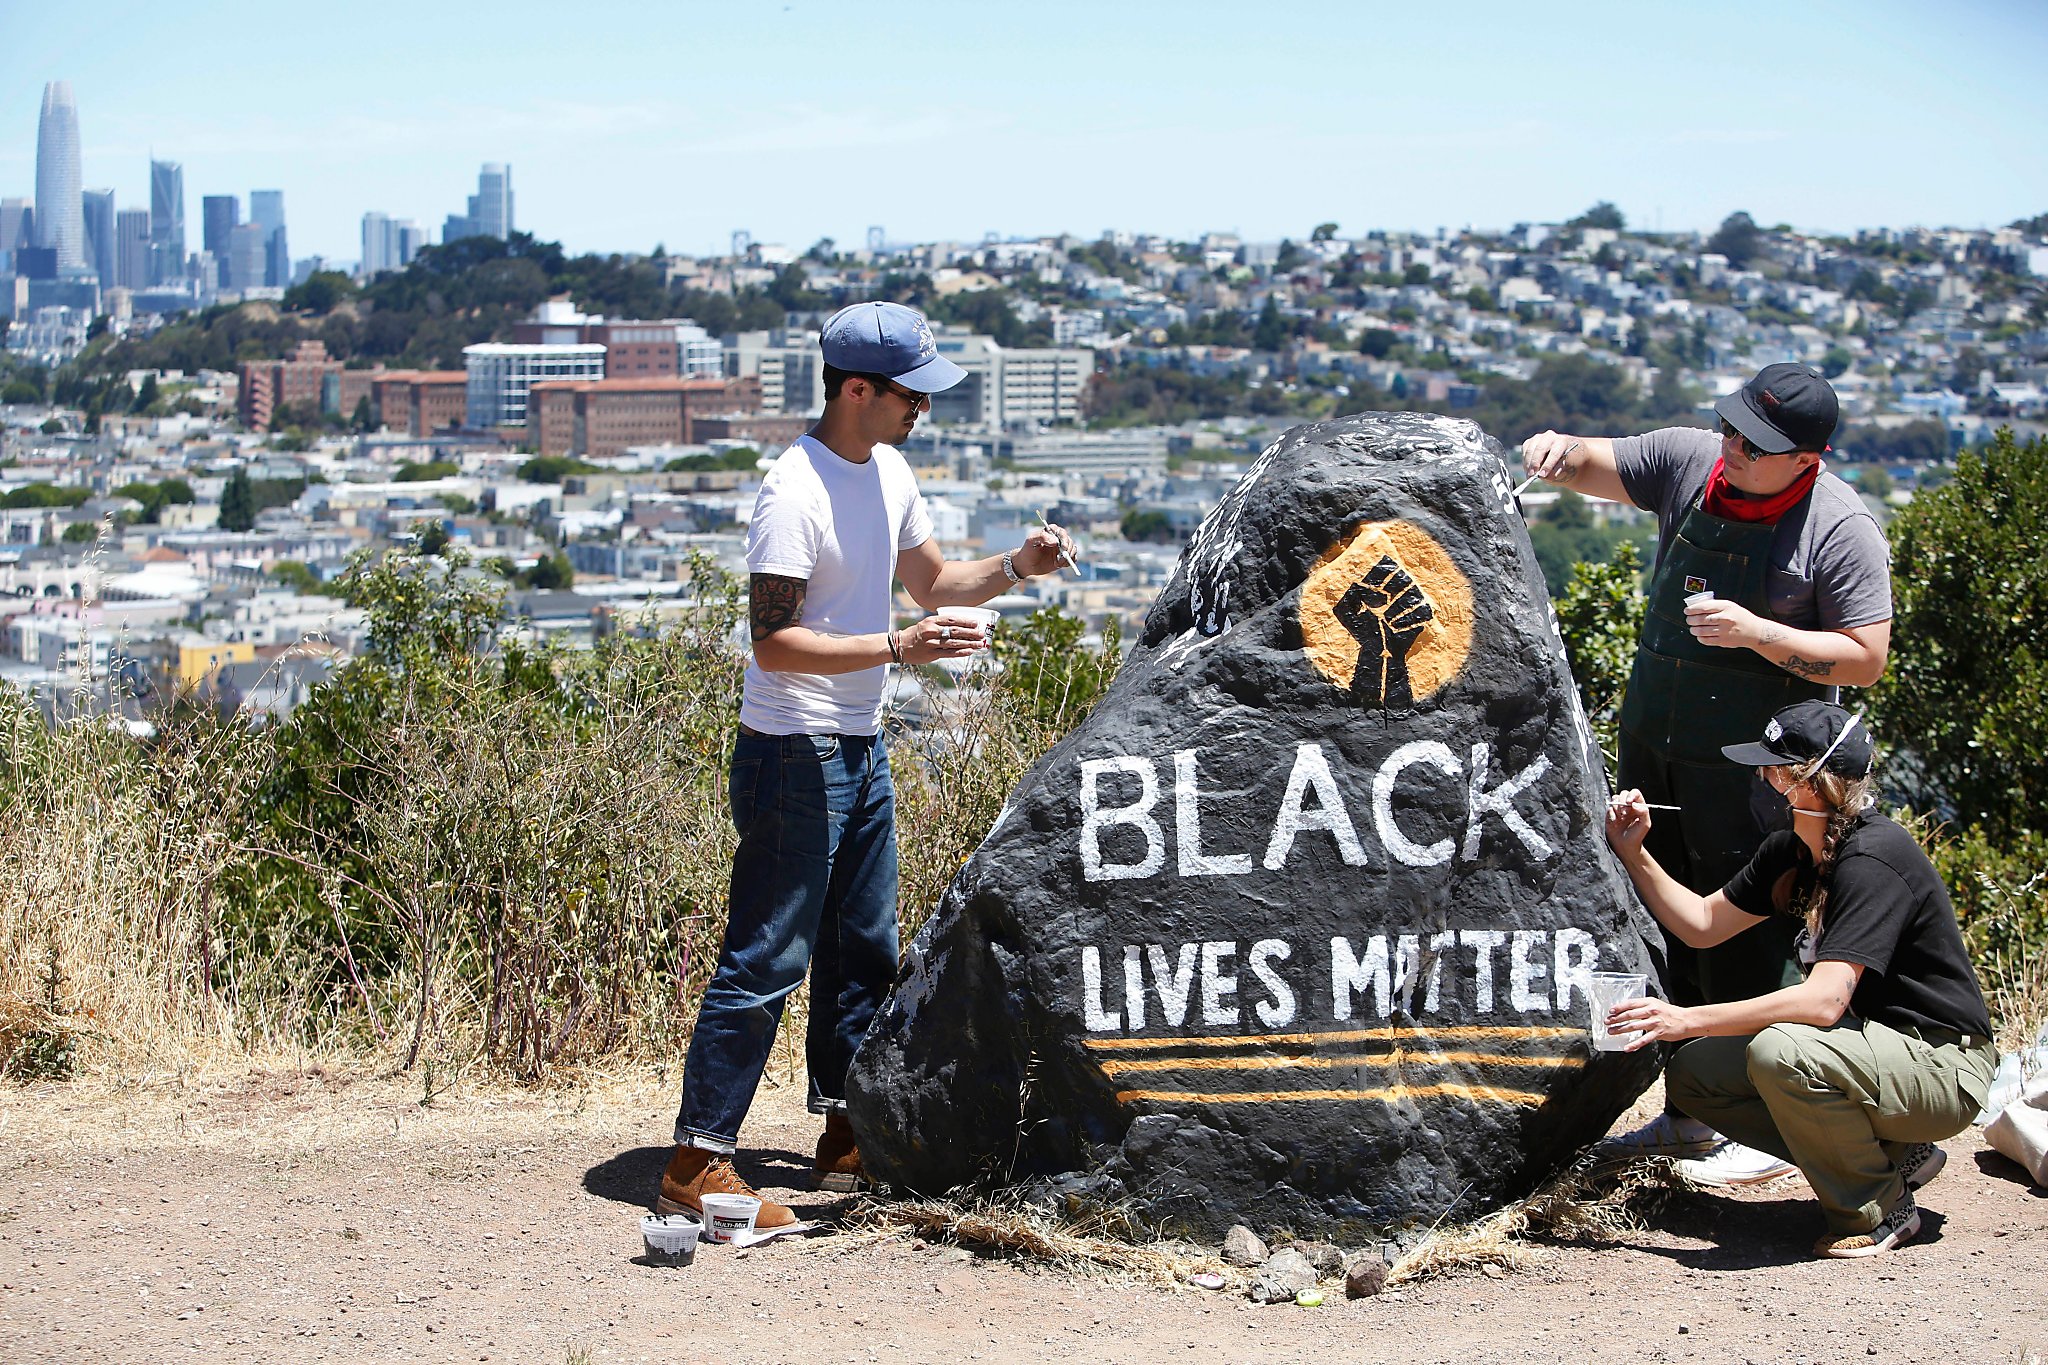 ‘Bernal found its activist heart again’: Artist happy with new message on painted rock - San Francisco Chronicle